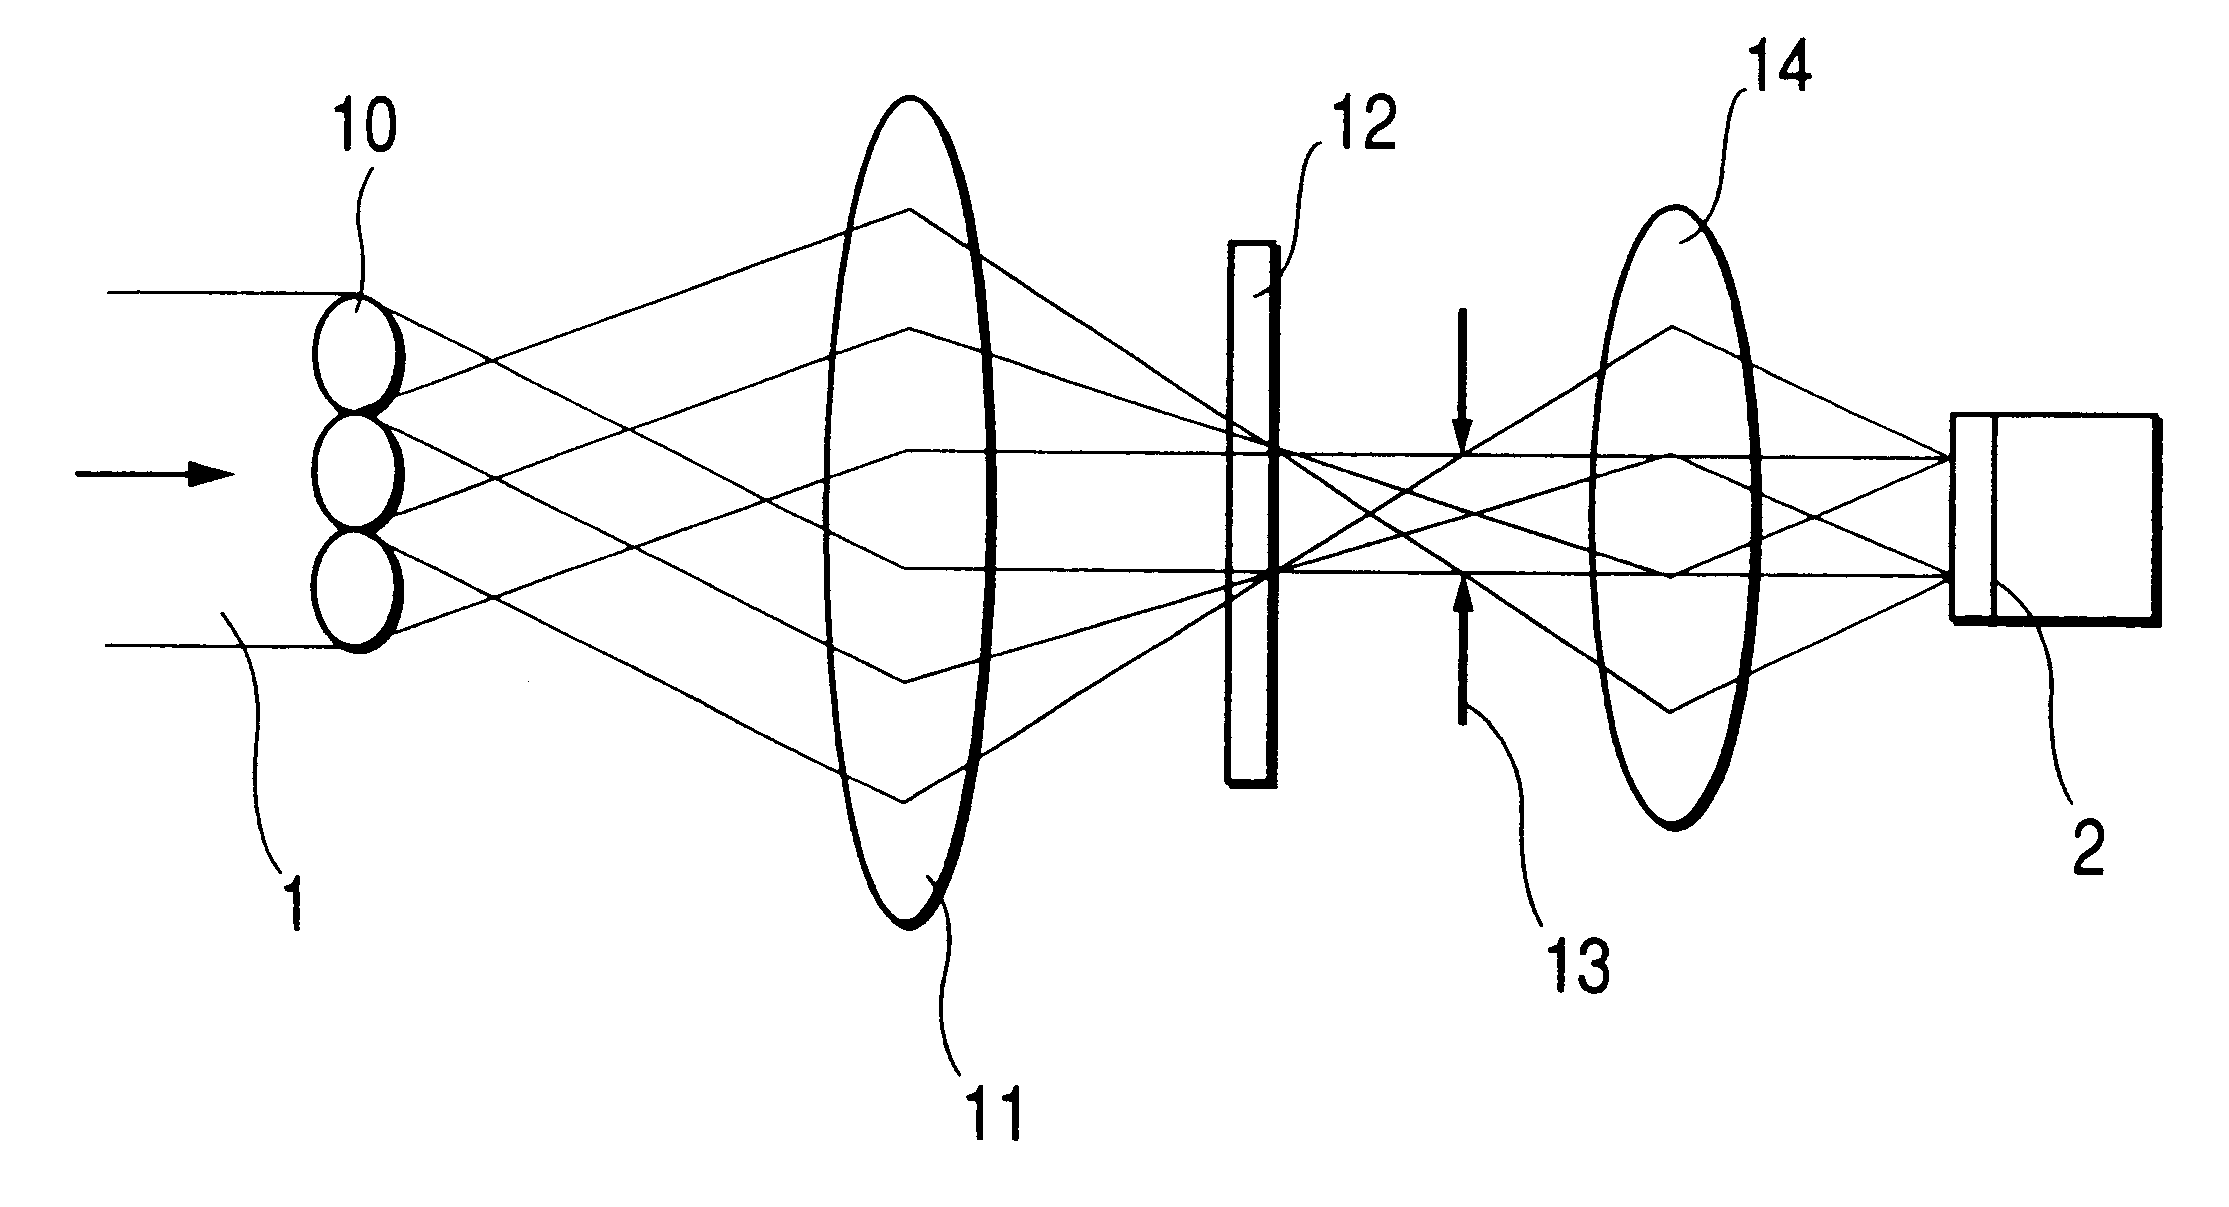 Laser processing method, method for manufacturing ink jet recording head using such method of manufacture, and ink jet recording head manufactured by such method of manufacture